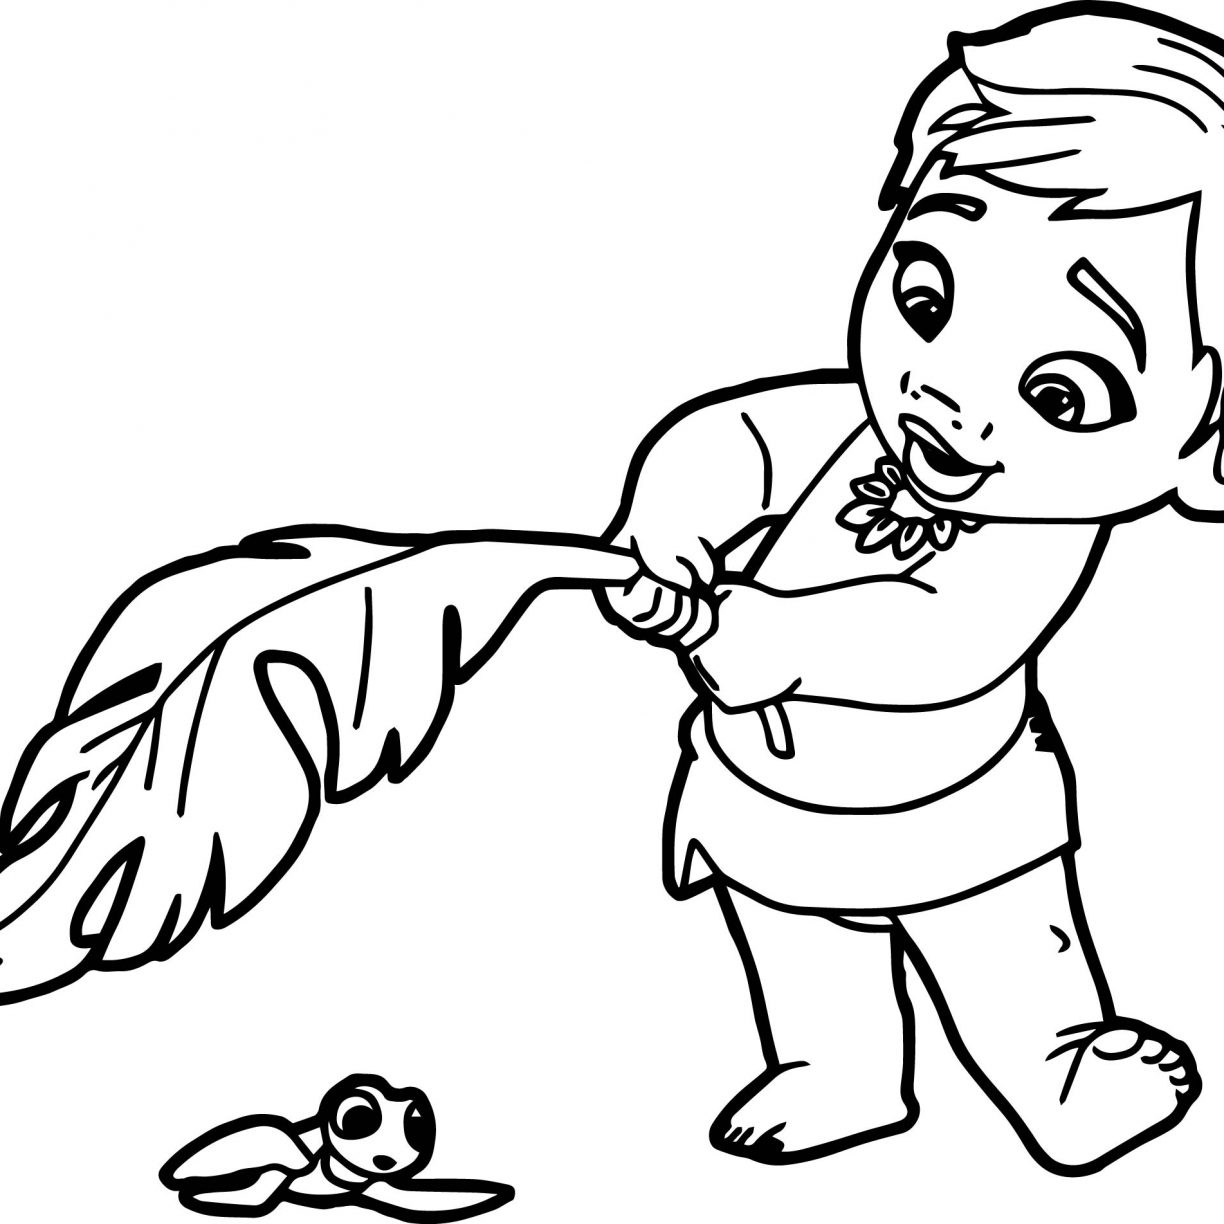 Free Baby Moana Coloring Pages - stackeduphigh